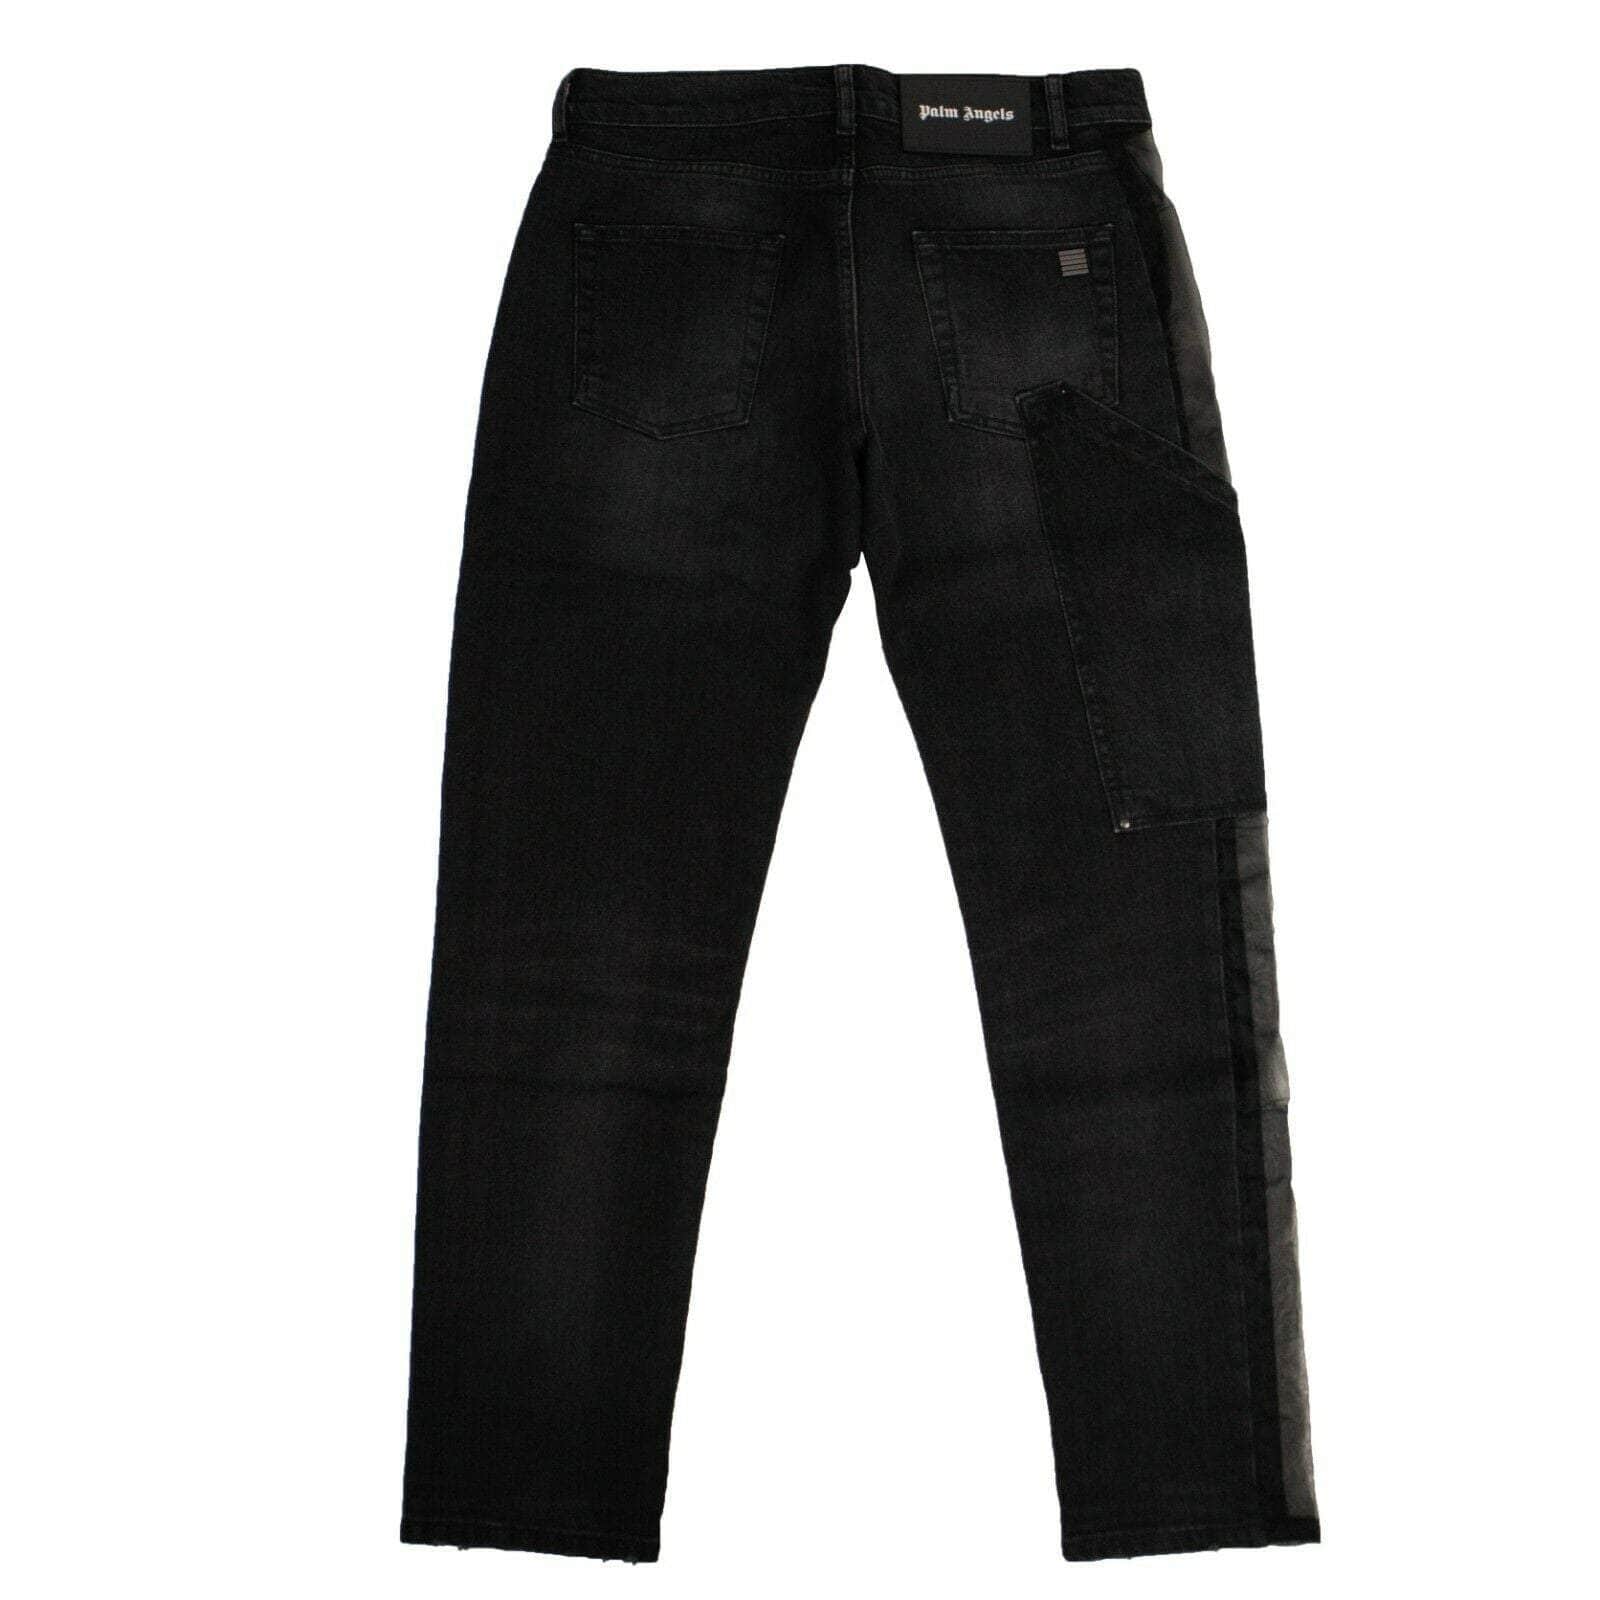 PALM ANGELS 250-500, couponcollection, gender-womens, main-clothing, palm-angels, size-26, size-28 28 Black Sheer Side Stripes Jeans 82NGG-PA-1440/28 82NGG-PA-1440/28